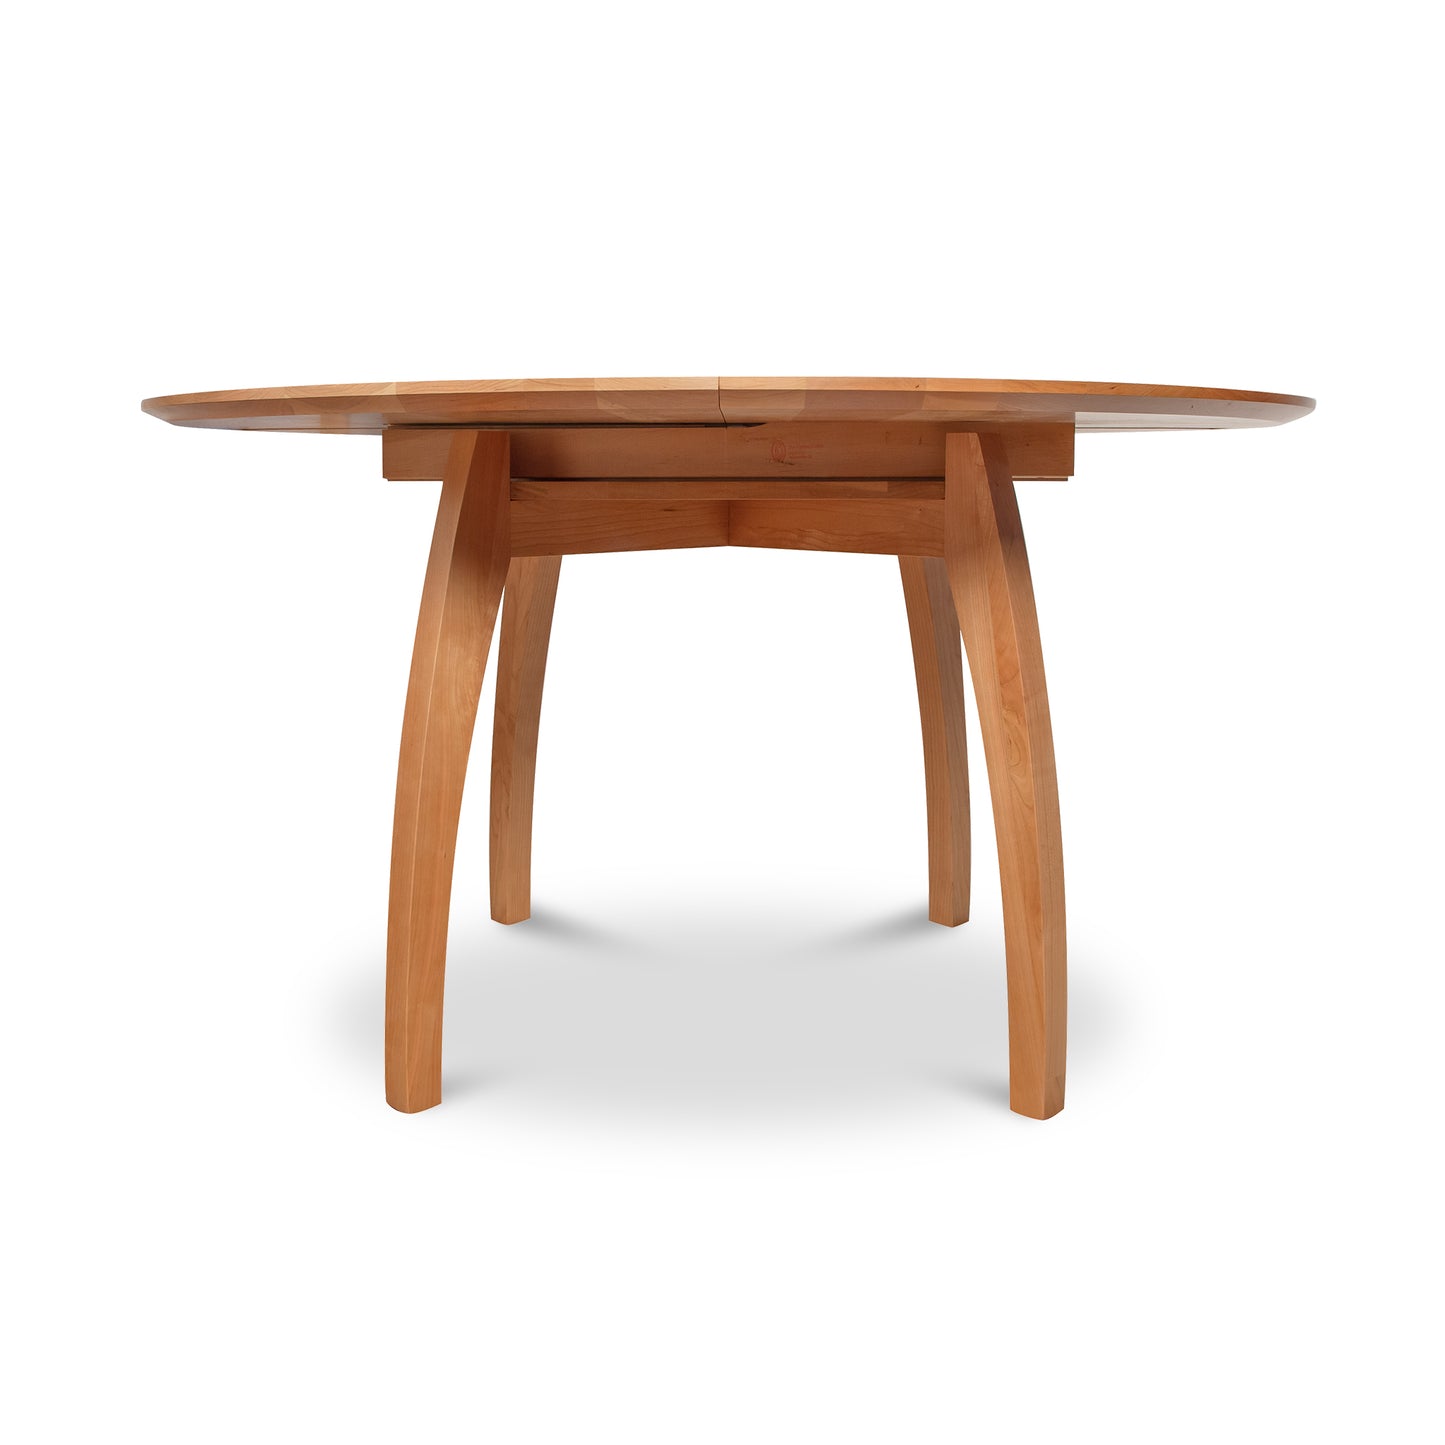 A contemporary design of the Vermont Modern Round Pedestal Extension Table with a natural handcrafted solid wood construction by Lyndon Furniture.